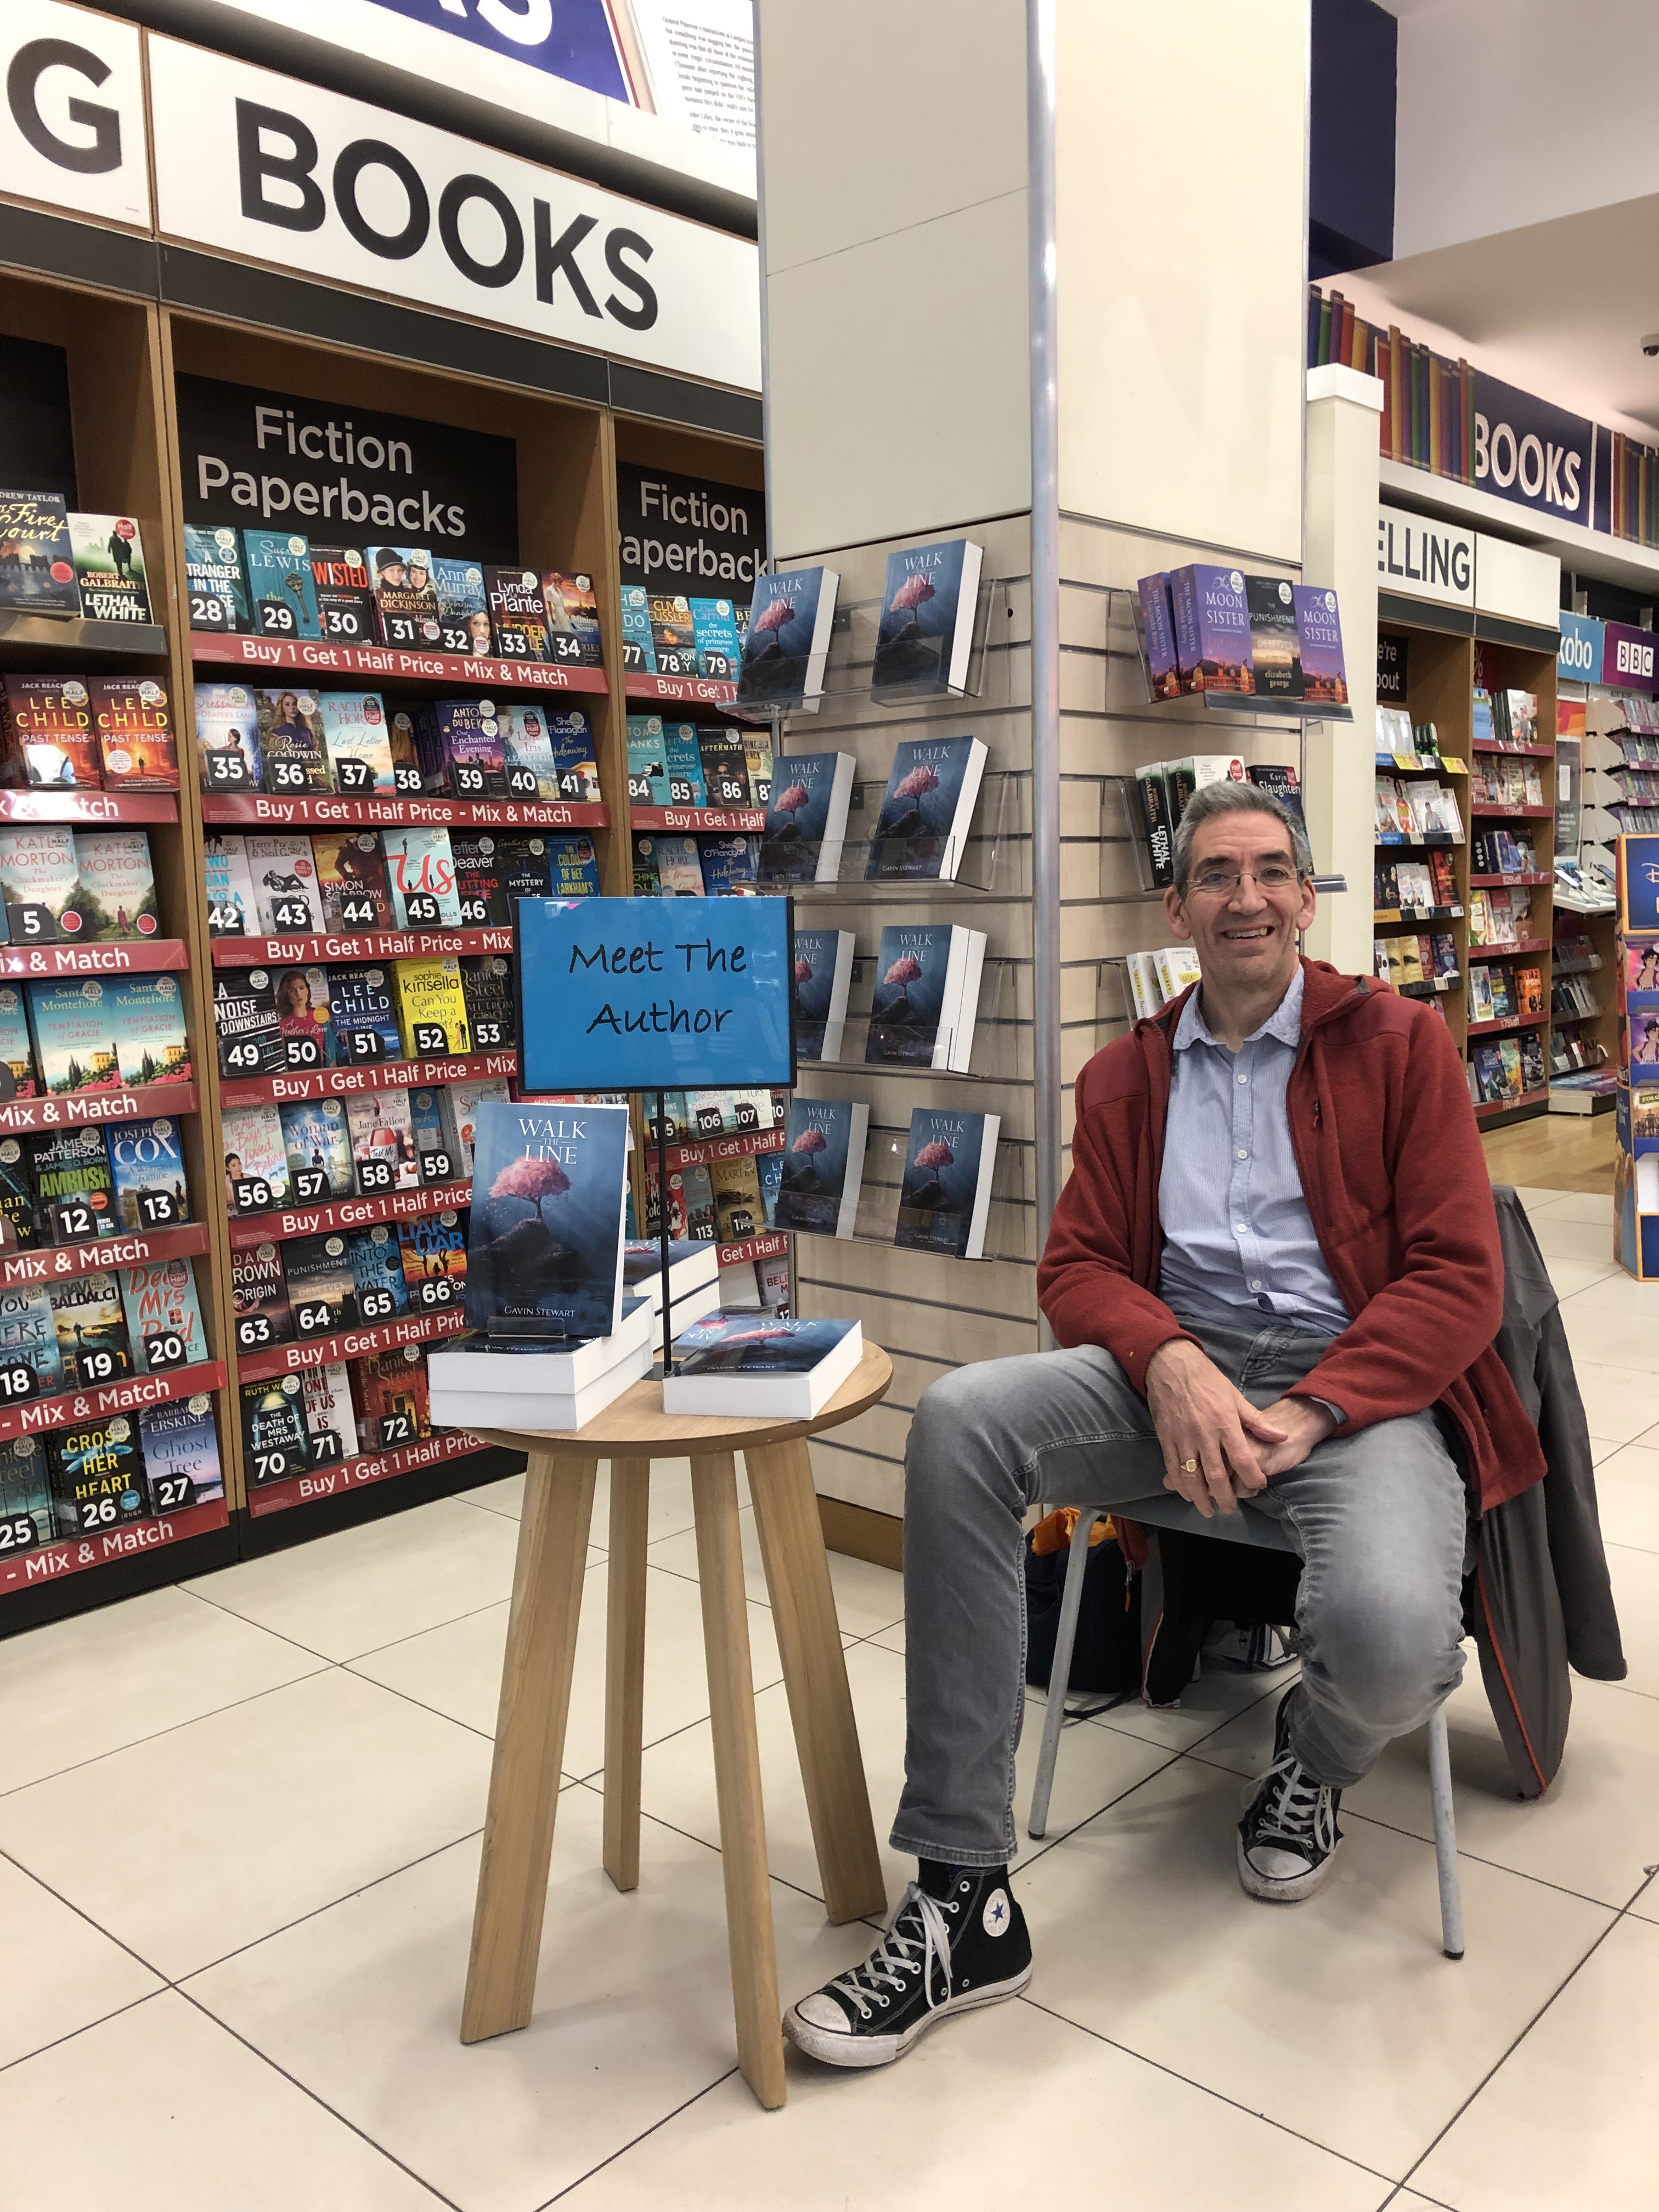 Gavin Stewart, the Author of Walk the Line Attended a Book Signing Event at WHSmith